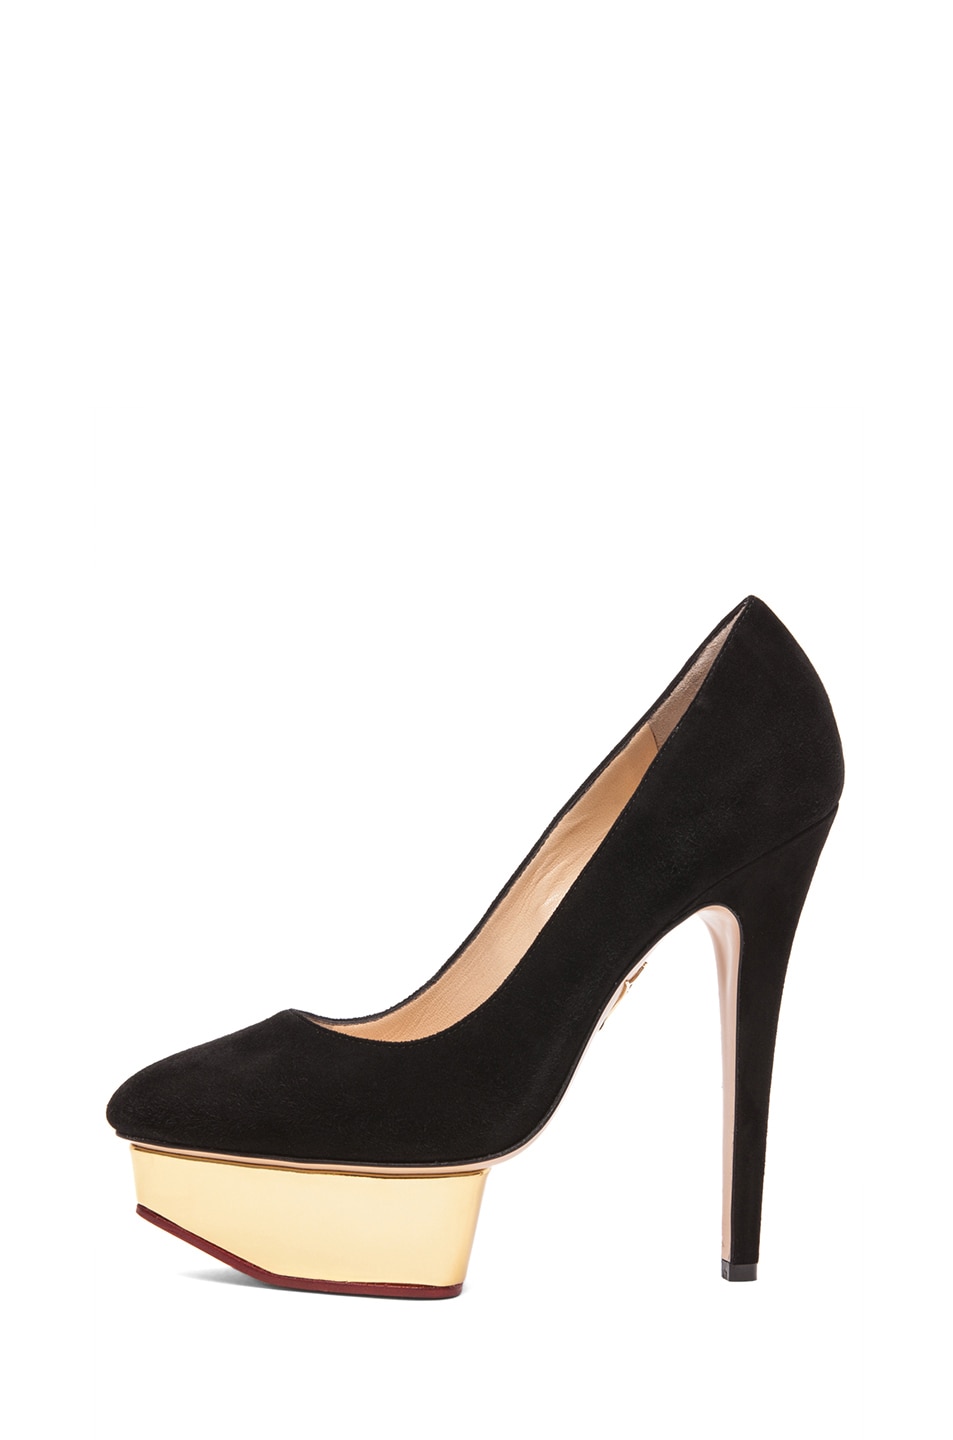 Image 1 of Charlotte Olympia Cindy Suede Pumps in Black Suede